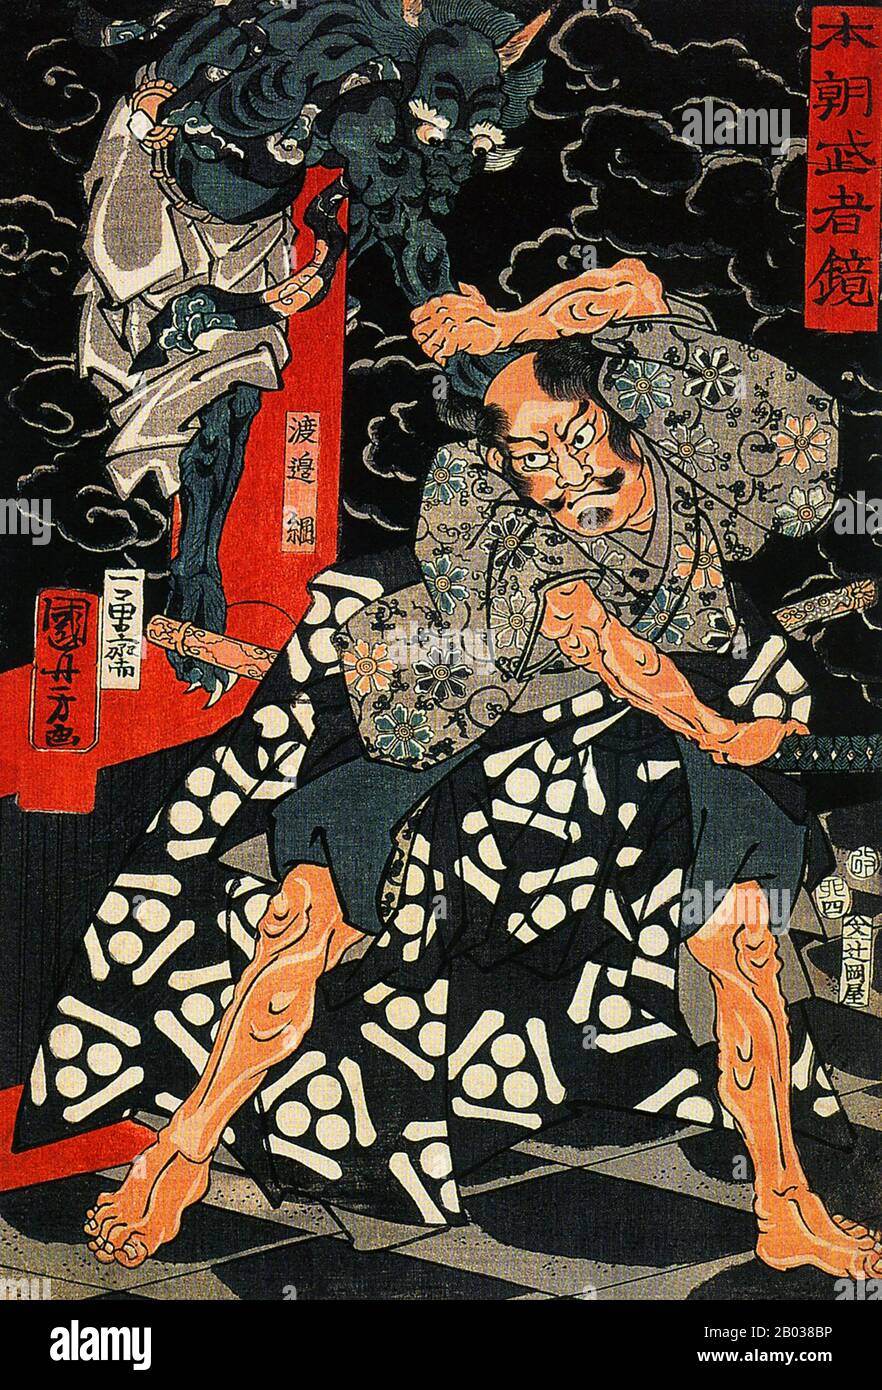 Ibaraki-doji was an oni (demon / ogre) in Japanese tales and legends from the Heian Era. The demon was known to go on murderous rampages throughout the countryside and across Kyoto. She would also fool innocent travellers and kill them, wearing various disguises to lure them in.  Once, she tried to kill the legendary samurai Watanabe no Tsuna as he was travelling, appearing as a beautiful maiden who needed help. When Tsuna approached, the girl transformed into an oni and grabbed him by his hair, flying through the air to Mount Atago. Tsuna, not panicking, easily cut off the demon's arm however Stock Photo